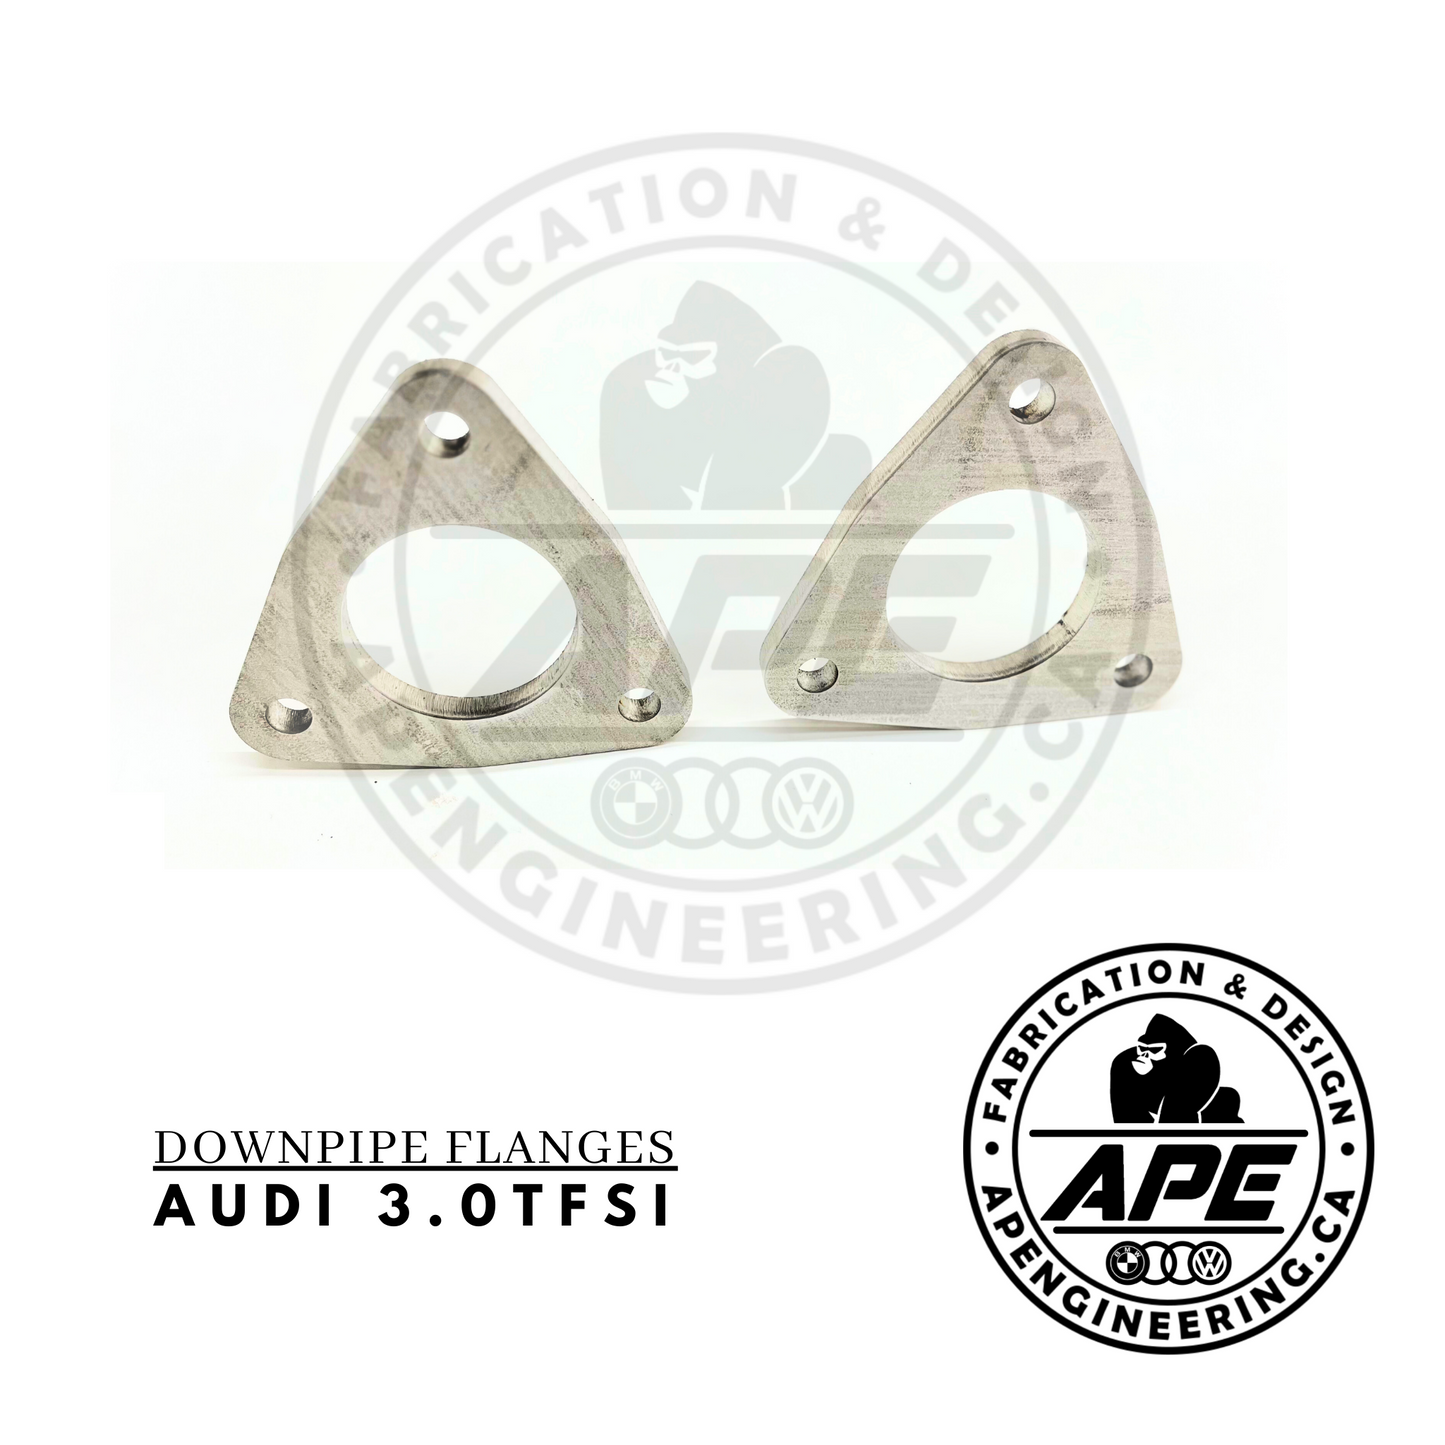 AUDI 3.0 TFSI V6 DOWNPIPE FLANGES - STAINLESS STEEL